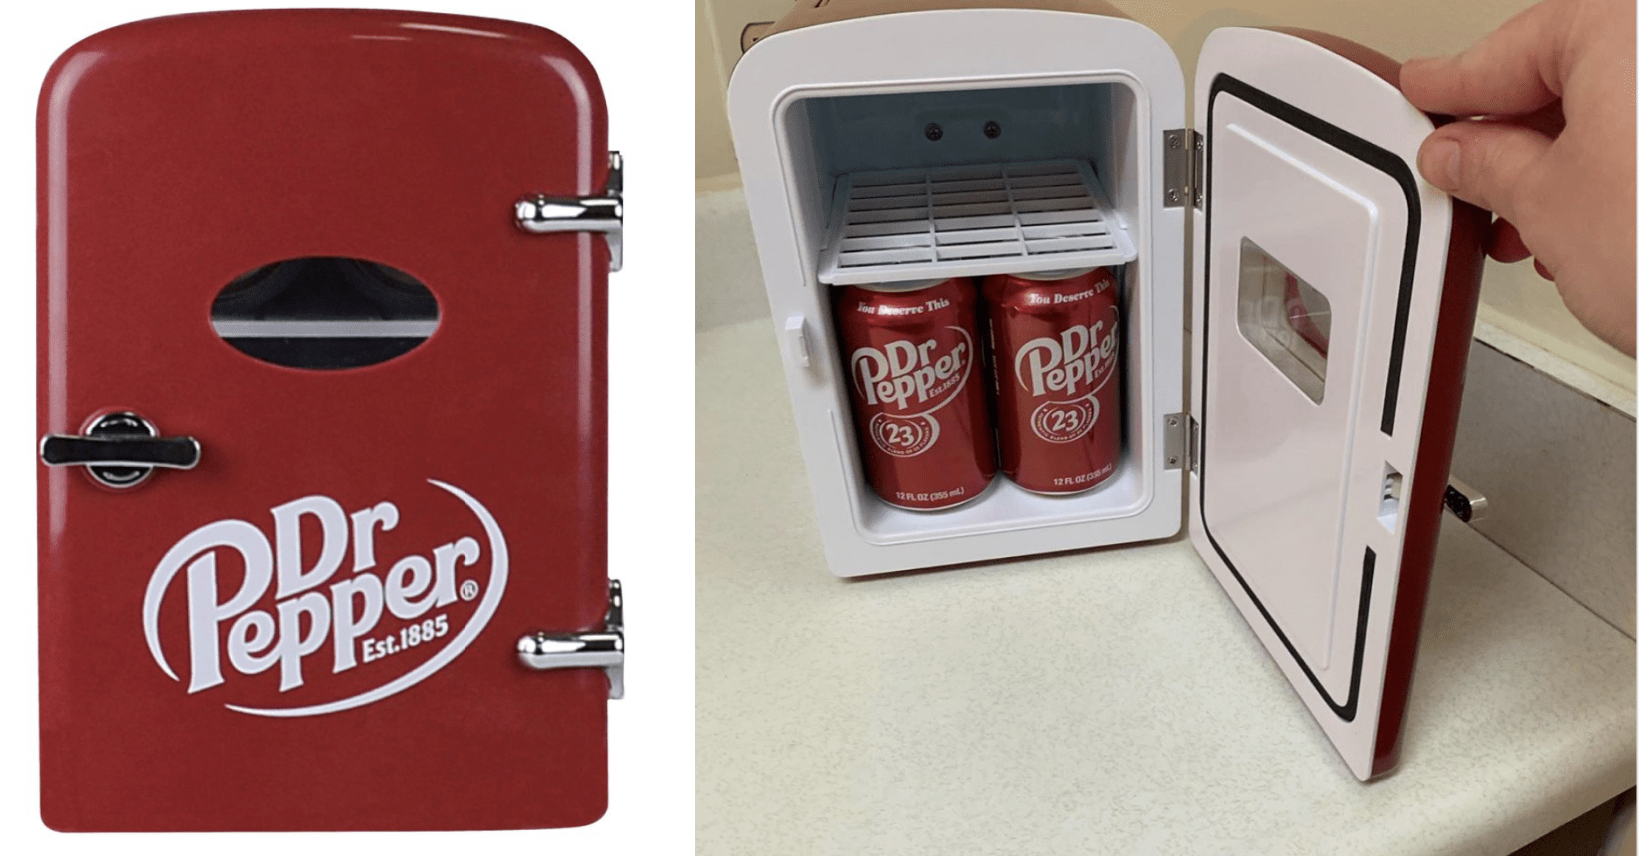 Walmart Is Selling A Dr. Pepper Mini Fridge For Just $22 and I Need It In My Life